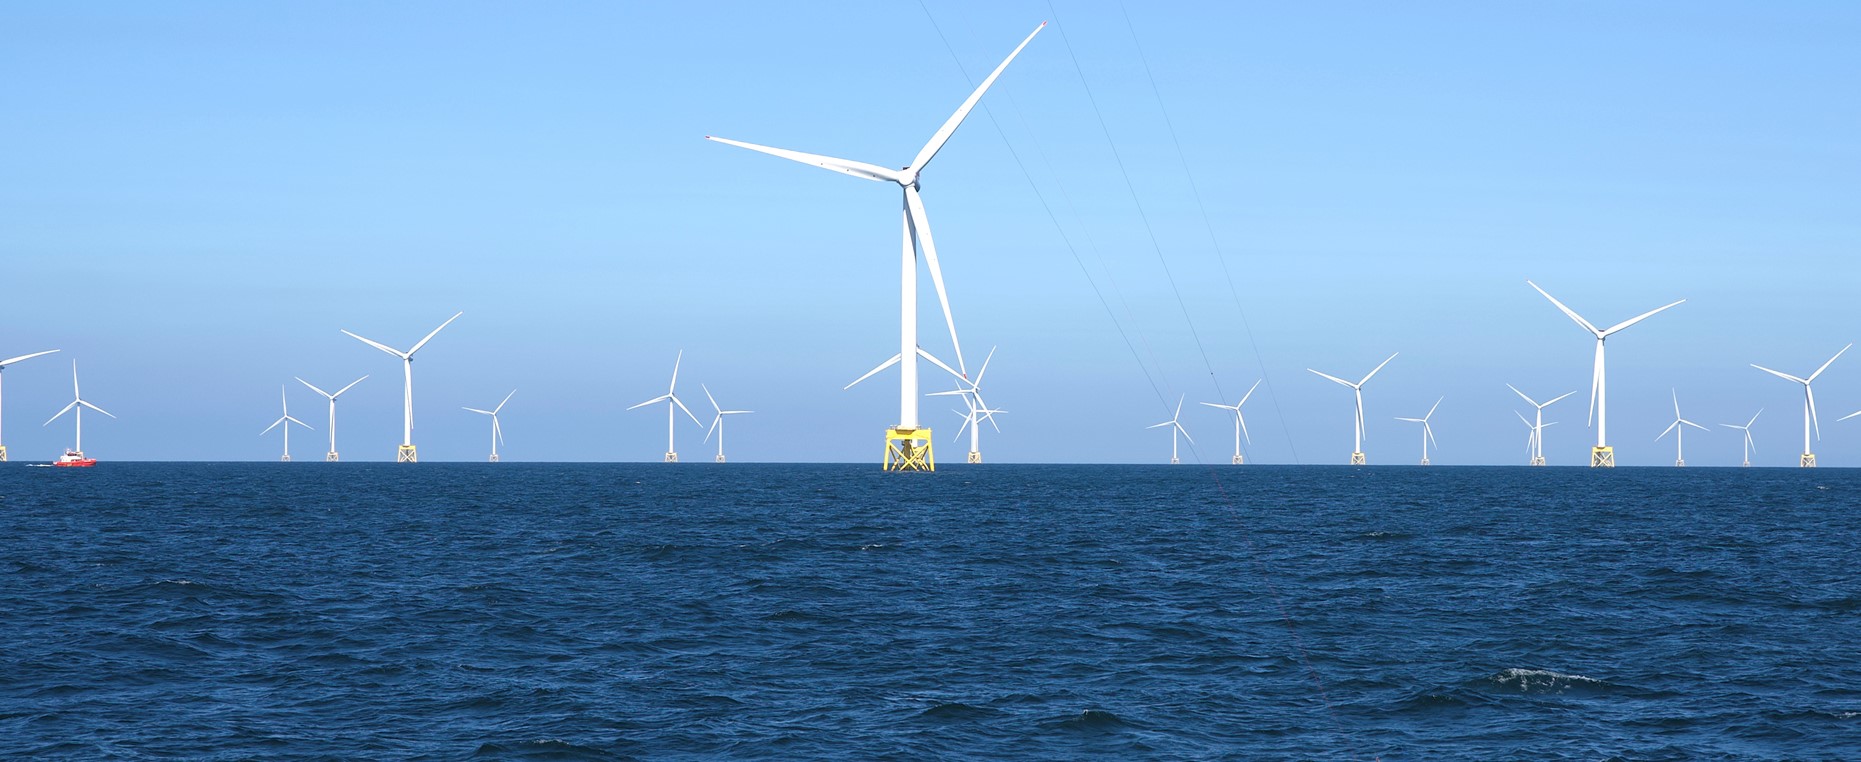 Maximum price raised for offshore wind investments in next Contracts for Difference round